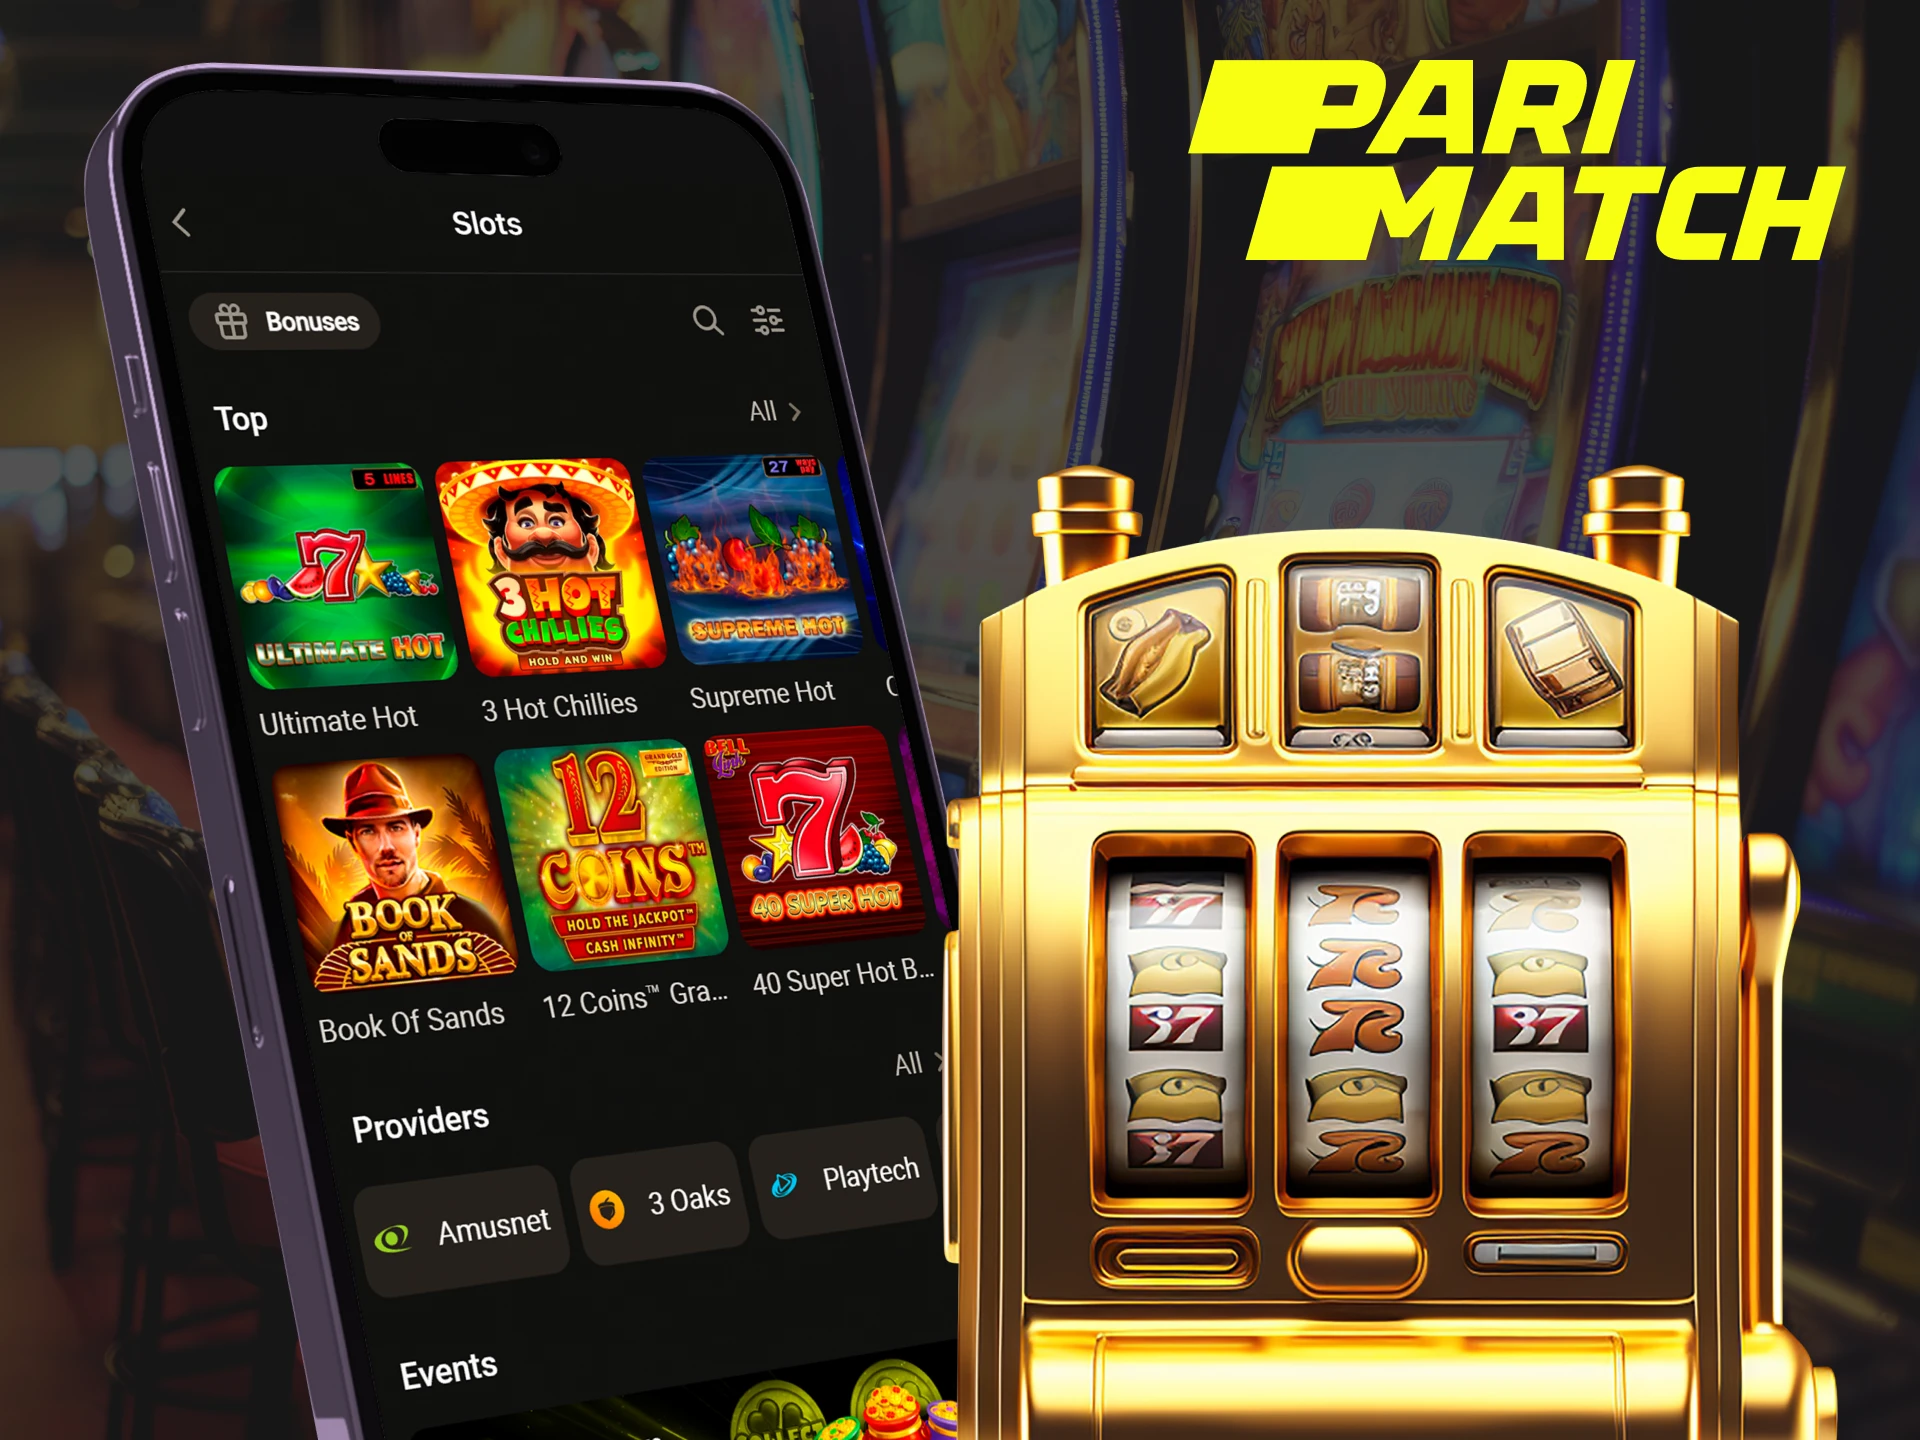 Parimatch offers many different slots in its app.